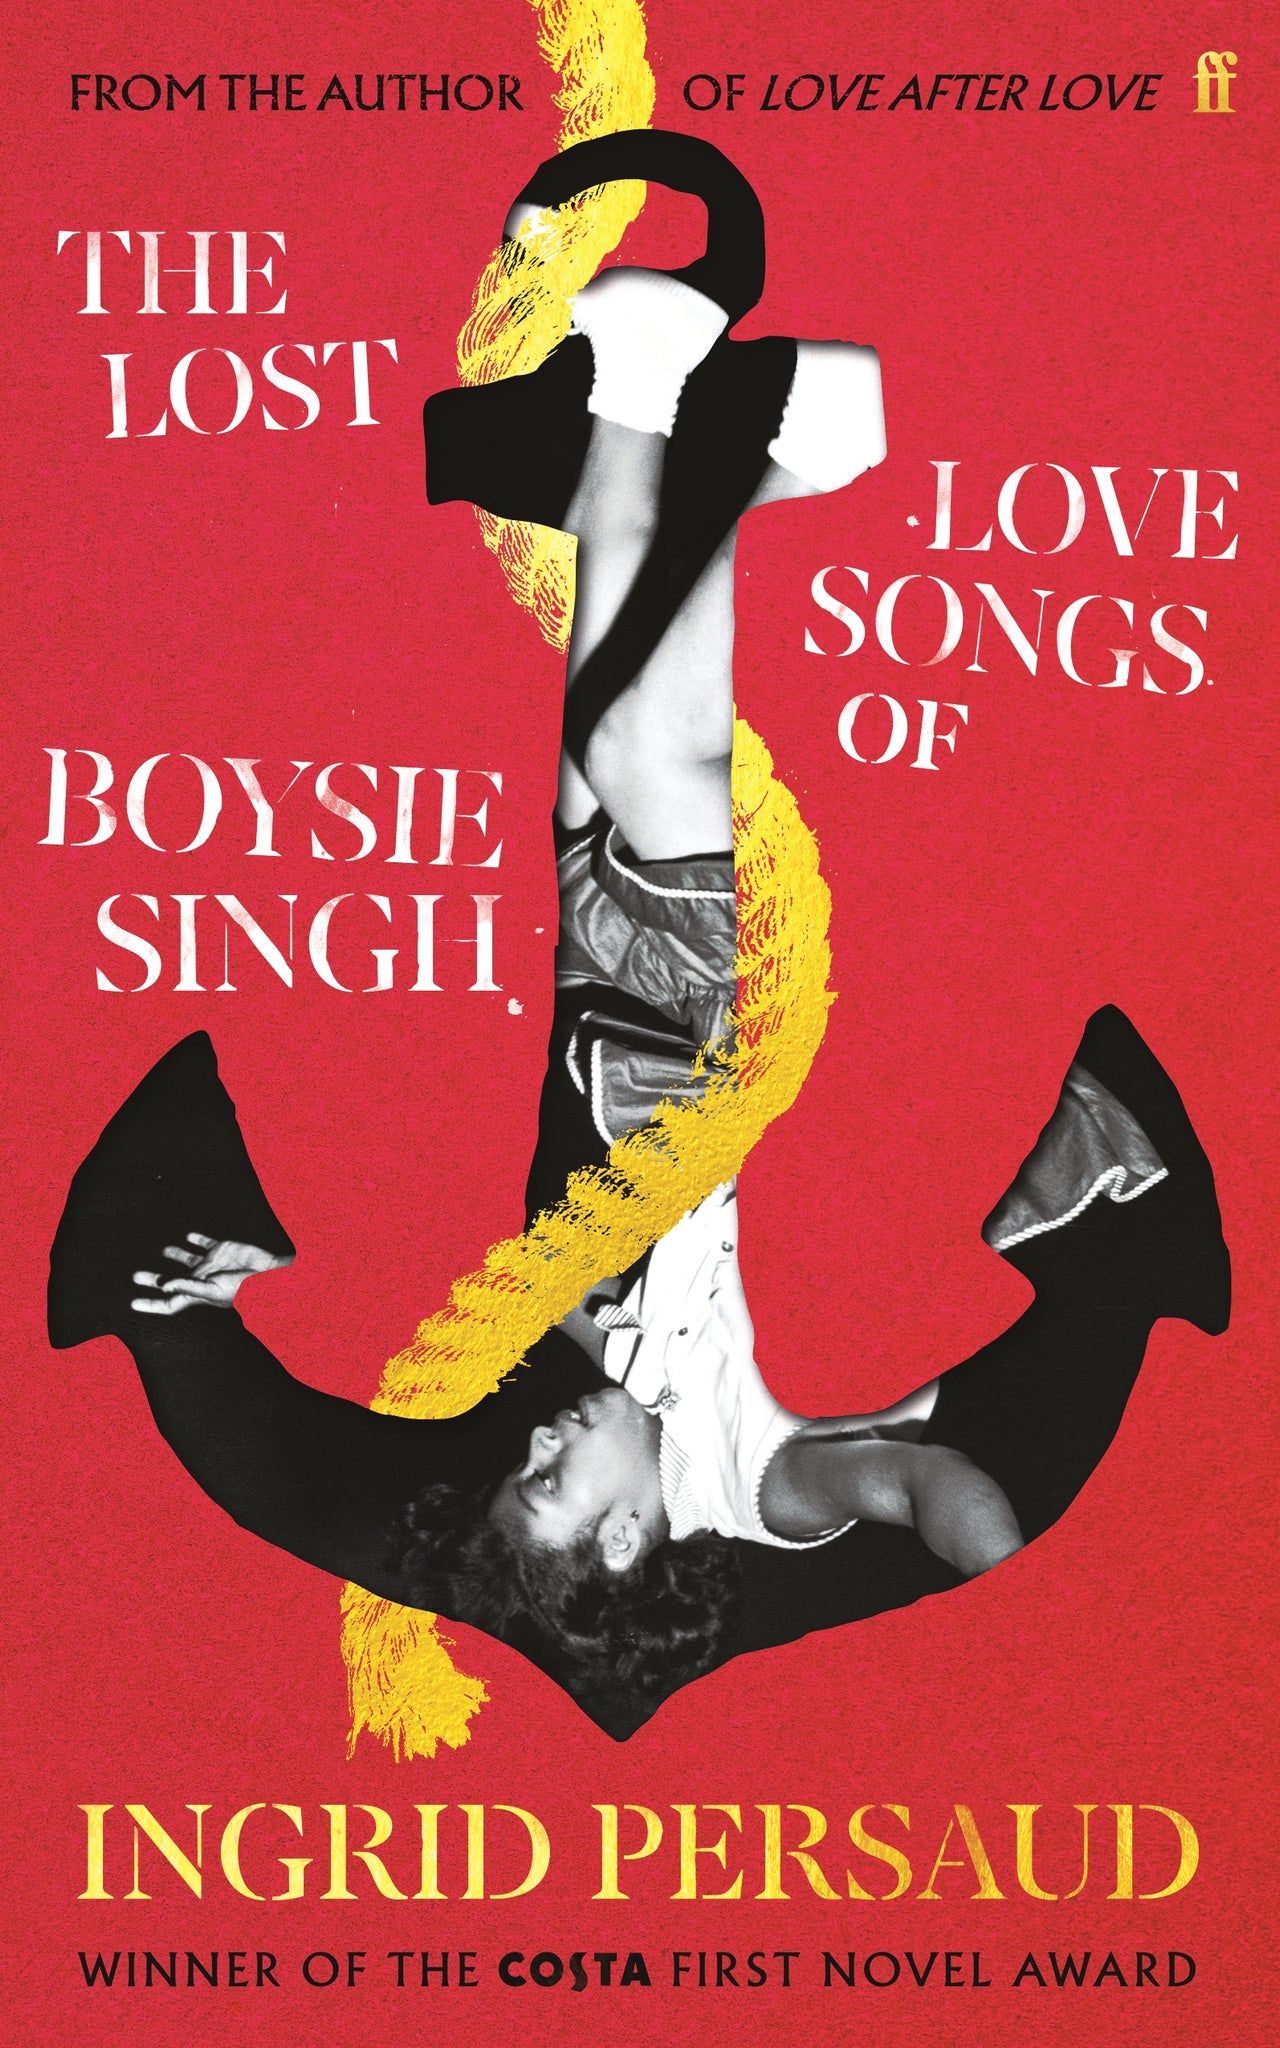 EVENT 13/05: Ingrid Persaud introduces The Lost Love Songs of Boysie Singh (Henleaze)